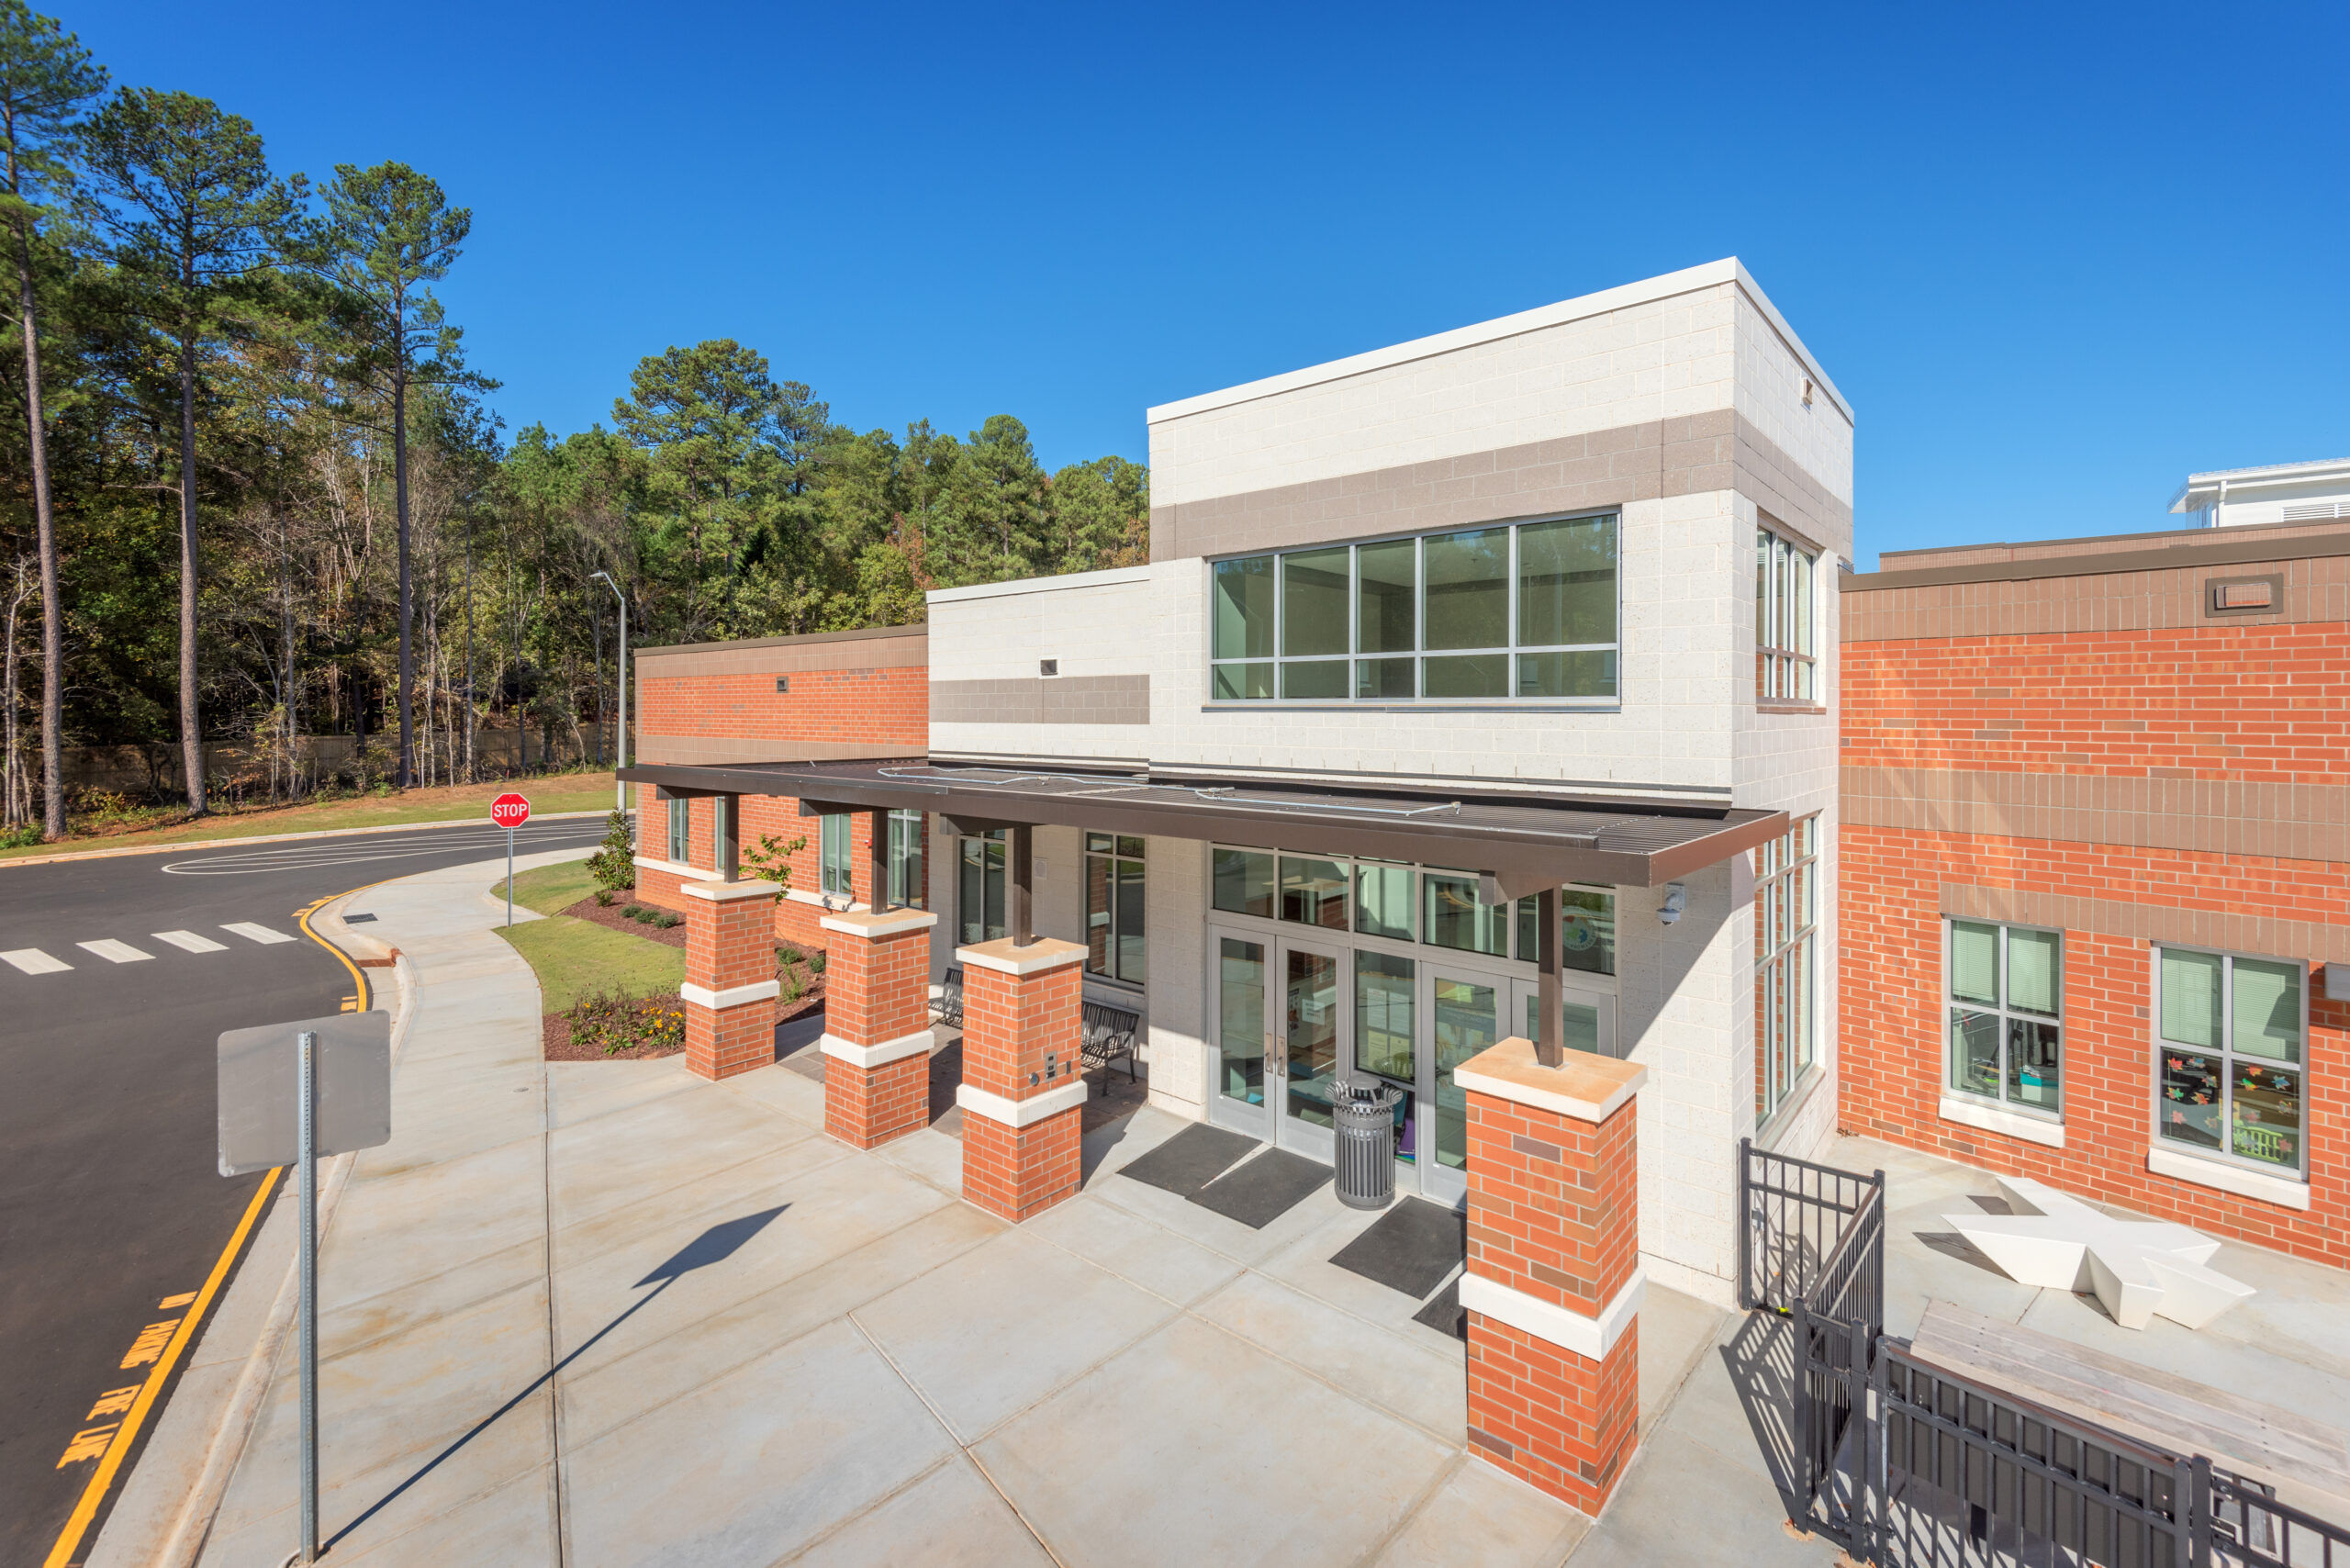 Barton Pond Elementary School Front Entrance with Brick Columns and Canopy Over Entrance Doors